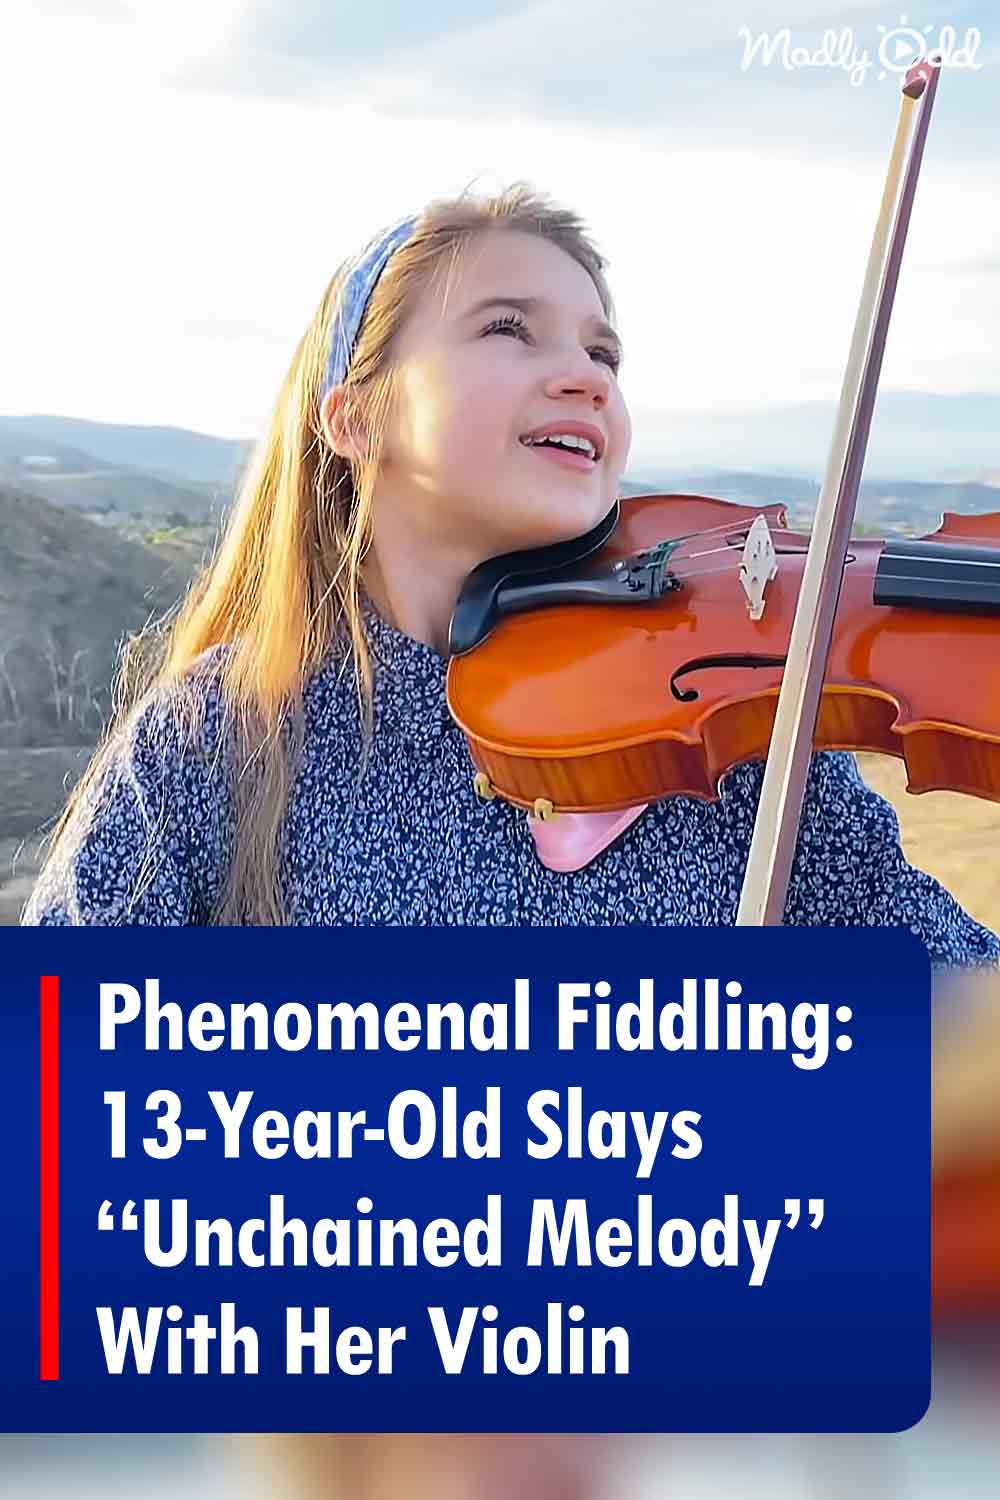 Phenomenal Fiddling: 13-Year-Old Slays “Unchained Melody” With Her Violin